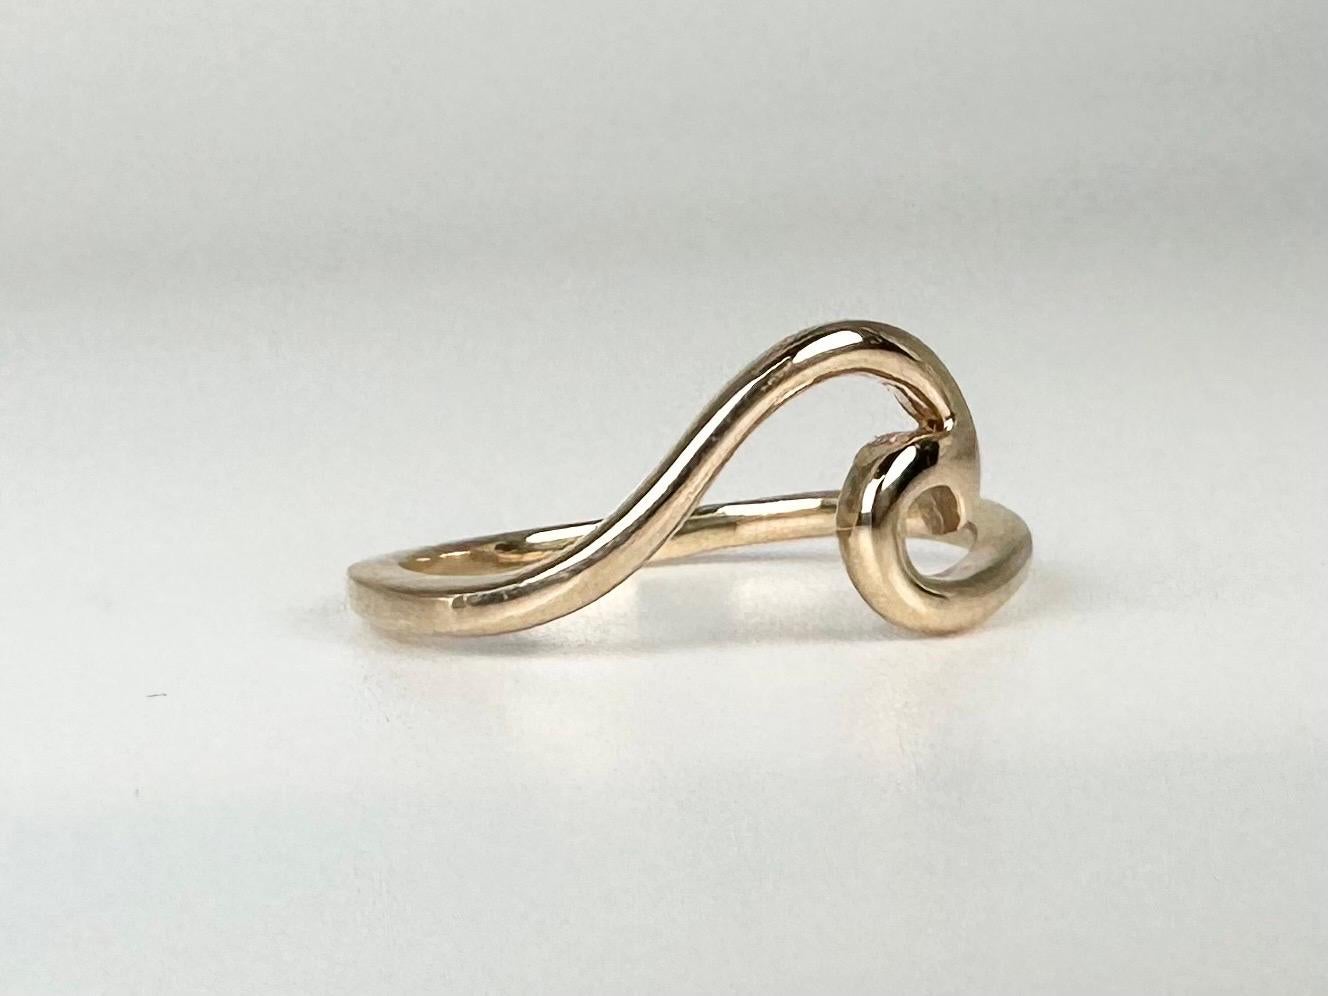 Minimal beach ring, a fantastic modern wave expression in 14KT solid gold! Can be sized into any size!

GOLD: 14KT gold
Grams:1.8
Item: 41000009mte

WHAT YOU GET AT STAMPAR JEWELERS:
Stampar Jewelers, located in the heart of Jupiter, Florida, is a